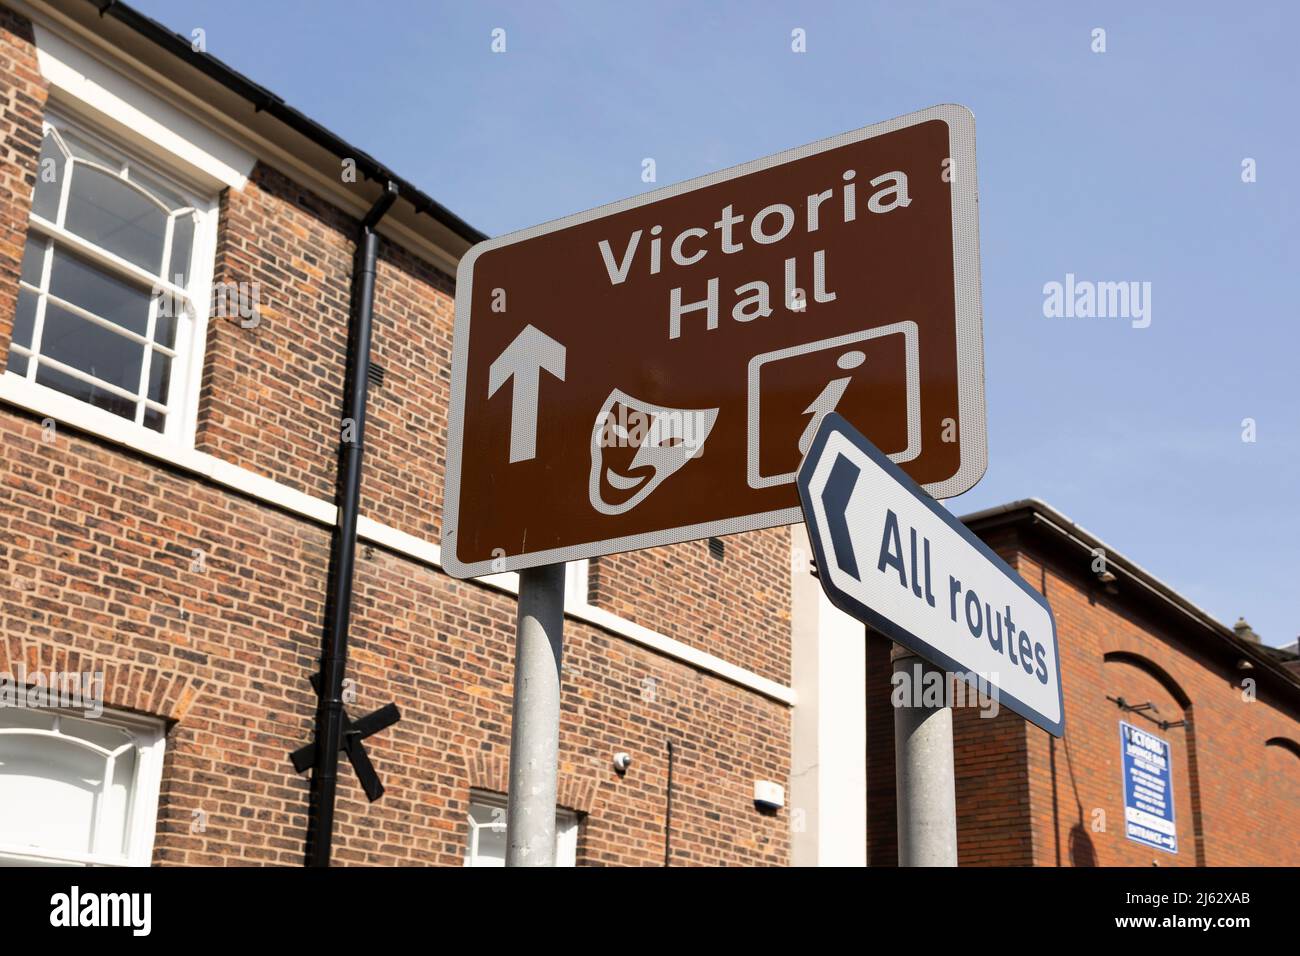 Hanley-Stoke-on-Trent, Staffordshire-United Kingdom April 21,2022 Victoria hall Hanley opened in 1888 it is a concert hall Stock Photo